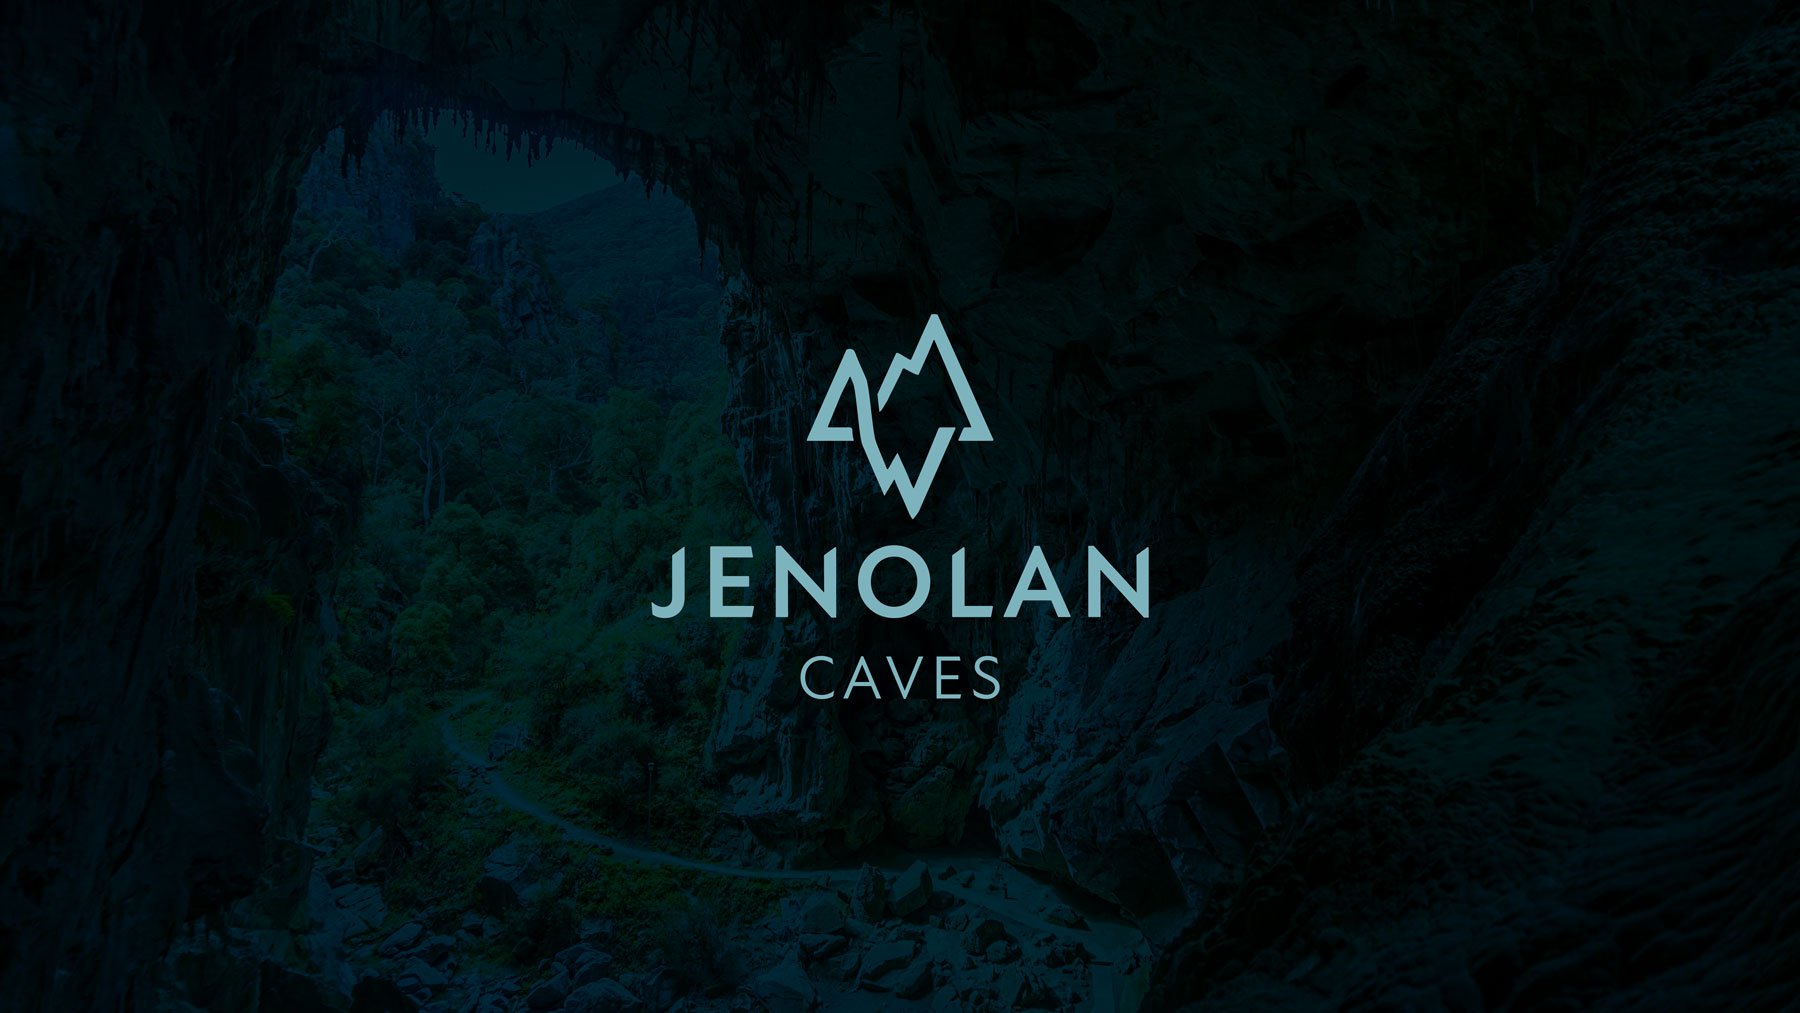 Jenolan-Caves_Brand-Development_Guidelines_and_Overview_FINALRG-4.jpg